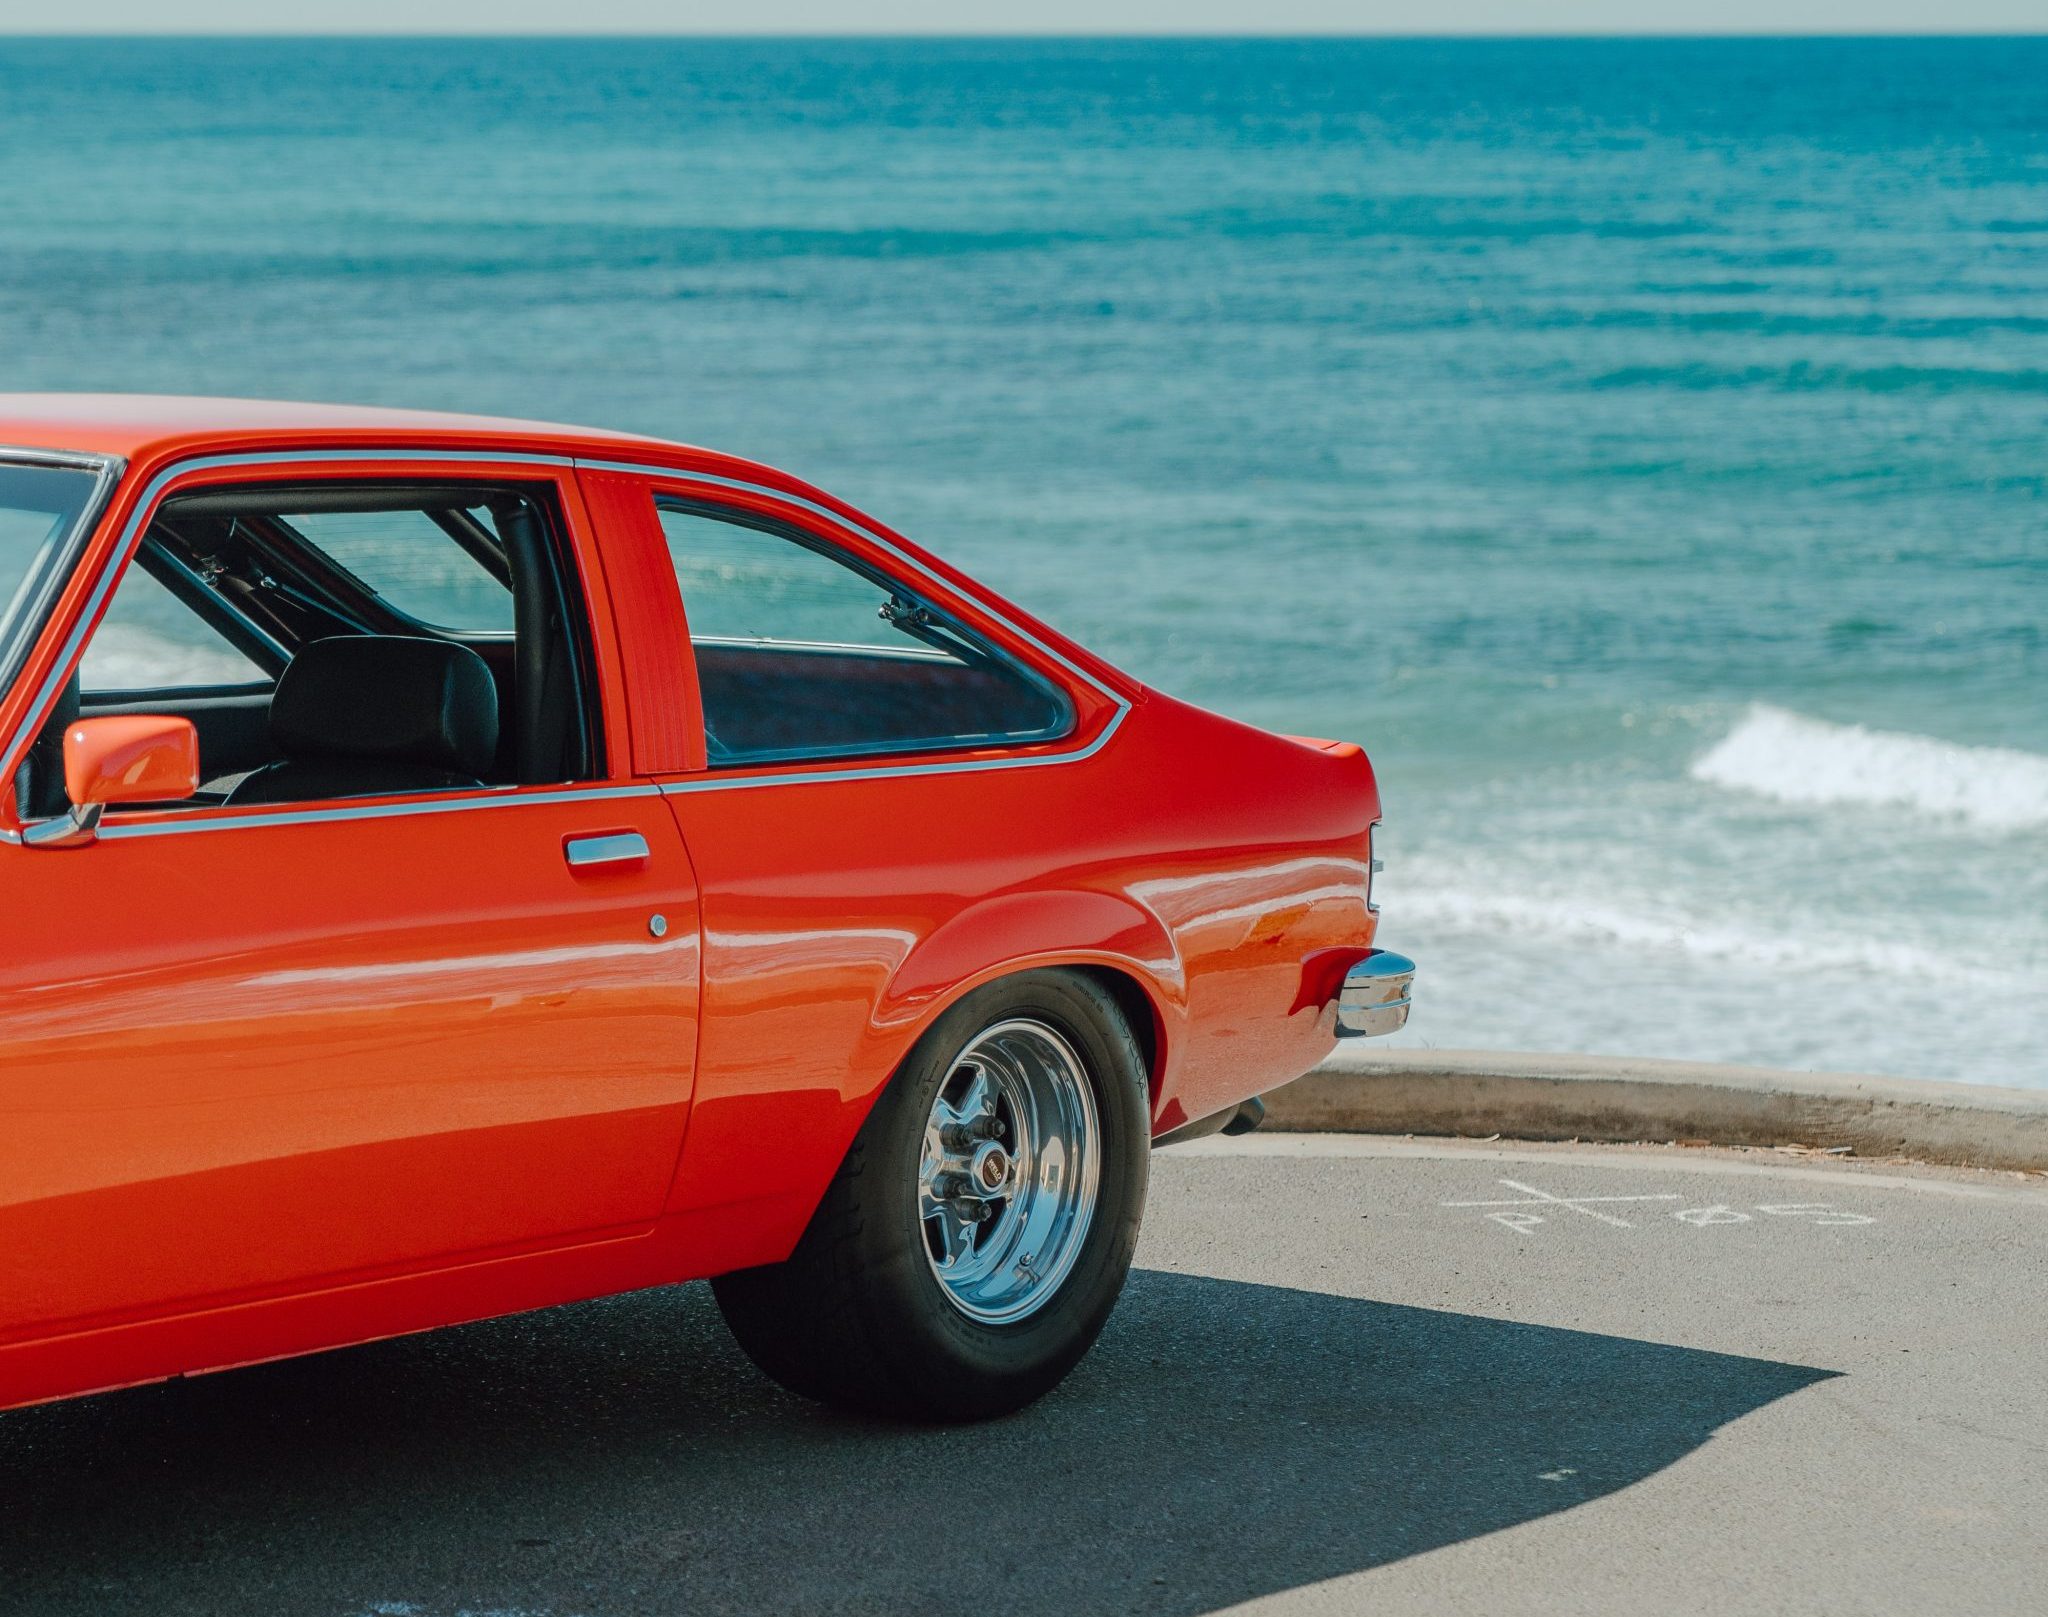 Orange 1976 Holden Torana looking the back with beach in background